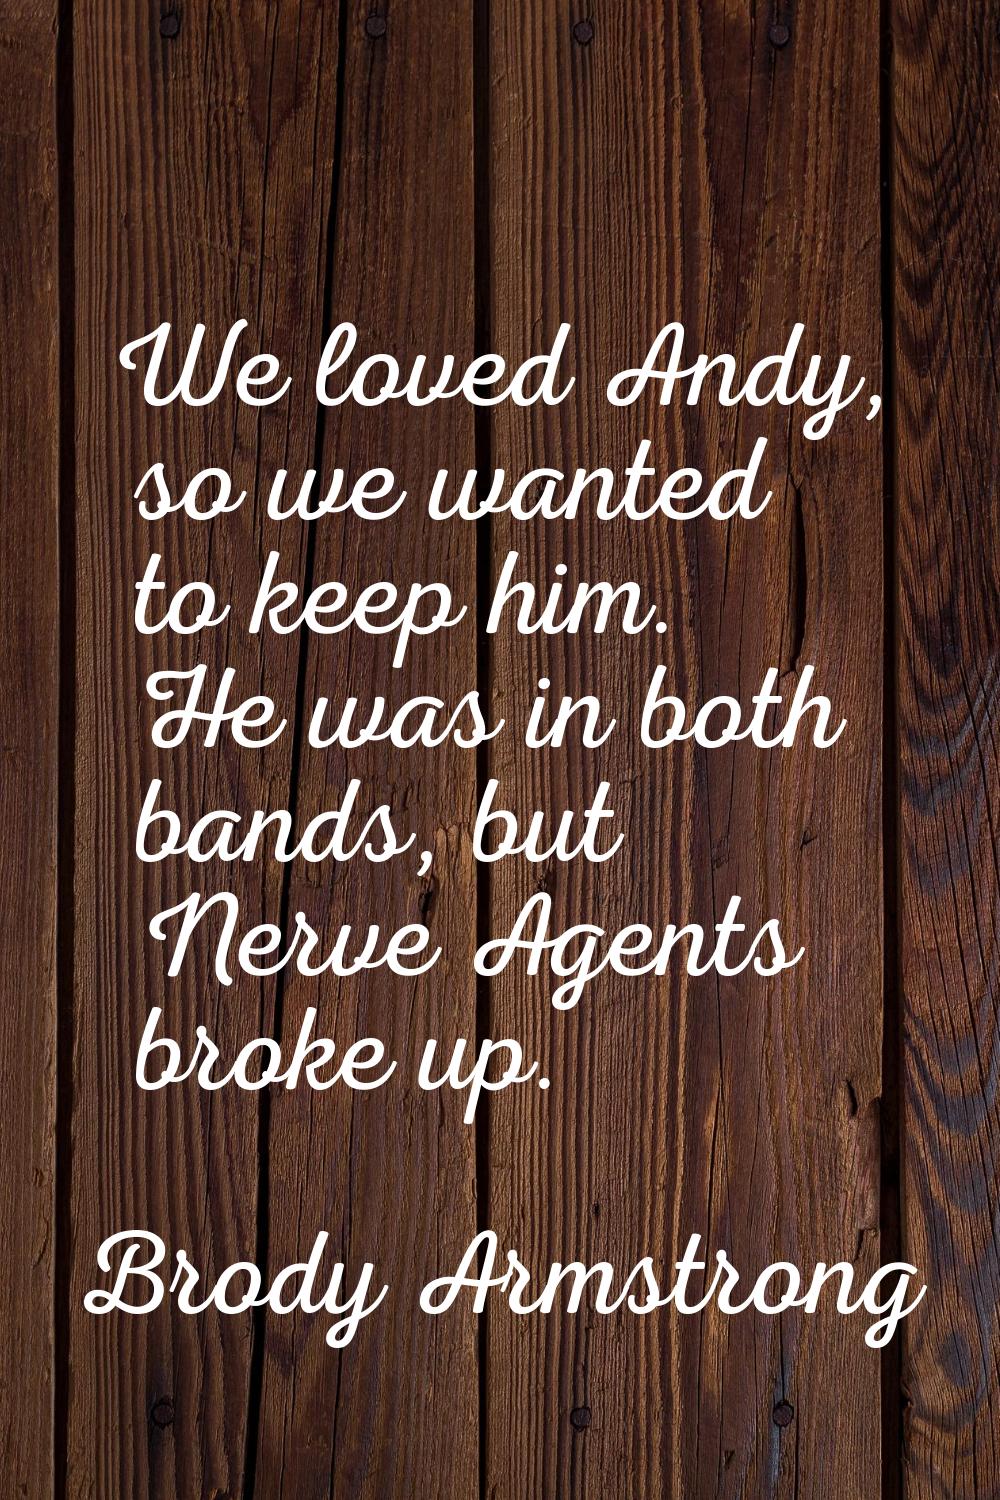 We loved Andy, so we wanted to keep him. He was in both bands, but Nerve Agents broke up.